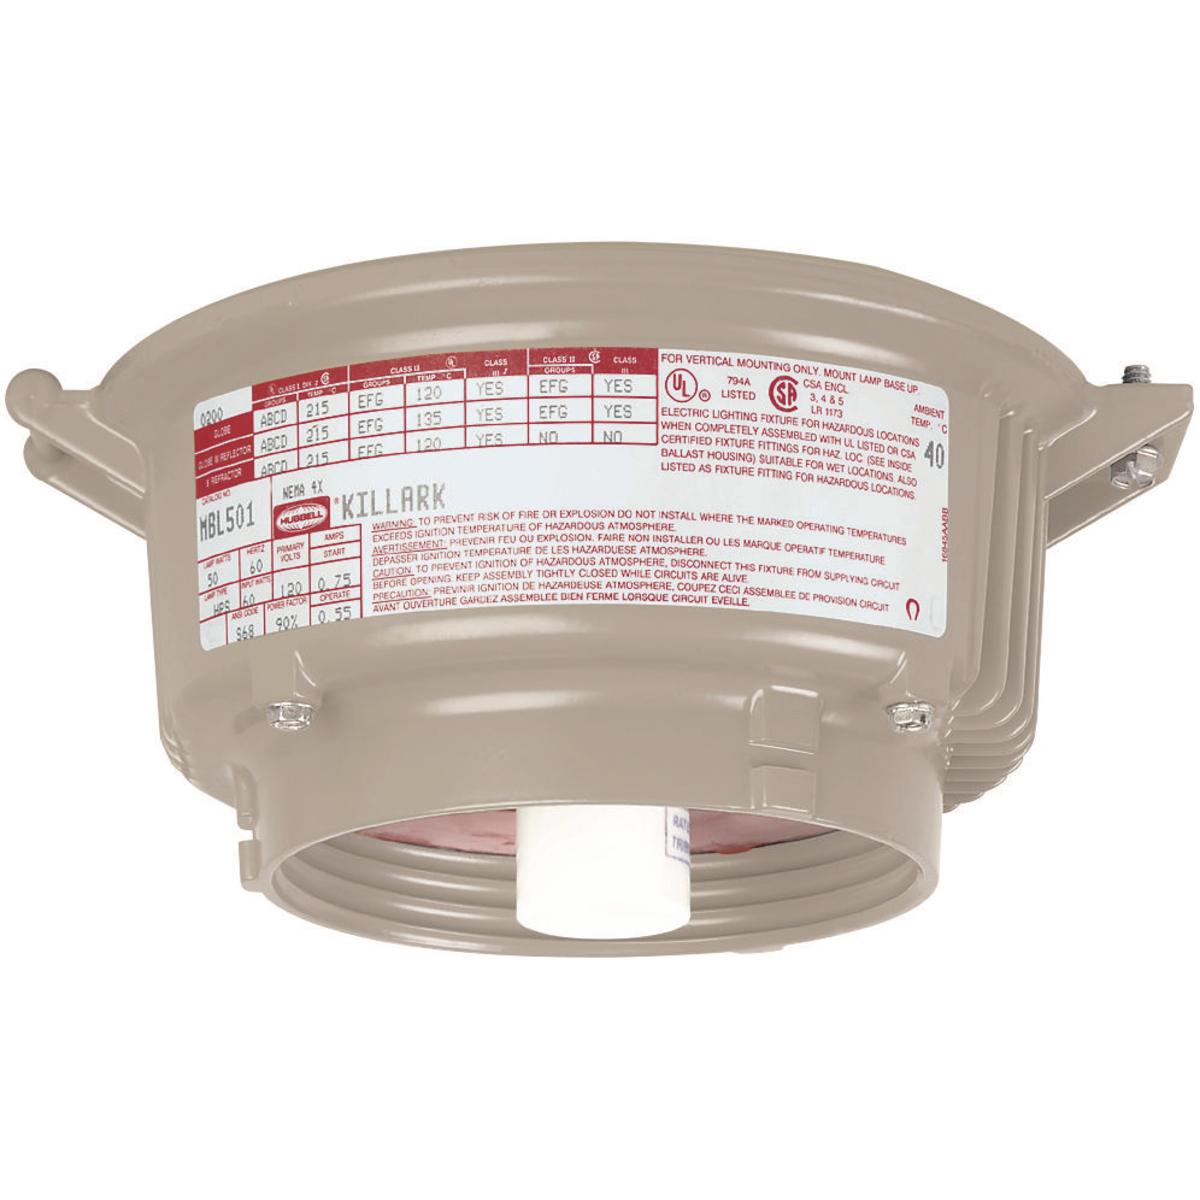 Hubbell MBL101 MB Series - Aluminum 100 Watt Medium Base High Pressure Sodium HID Light Fixture (Lamp Not Included) - 120V At 60Hz  ; Ballast tank and splice box – corrosion resistant copper-free aluminum alloy ; Baked powder epoxy/polyester finish, electrostatically ap